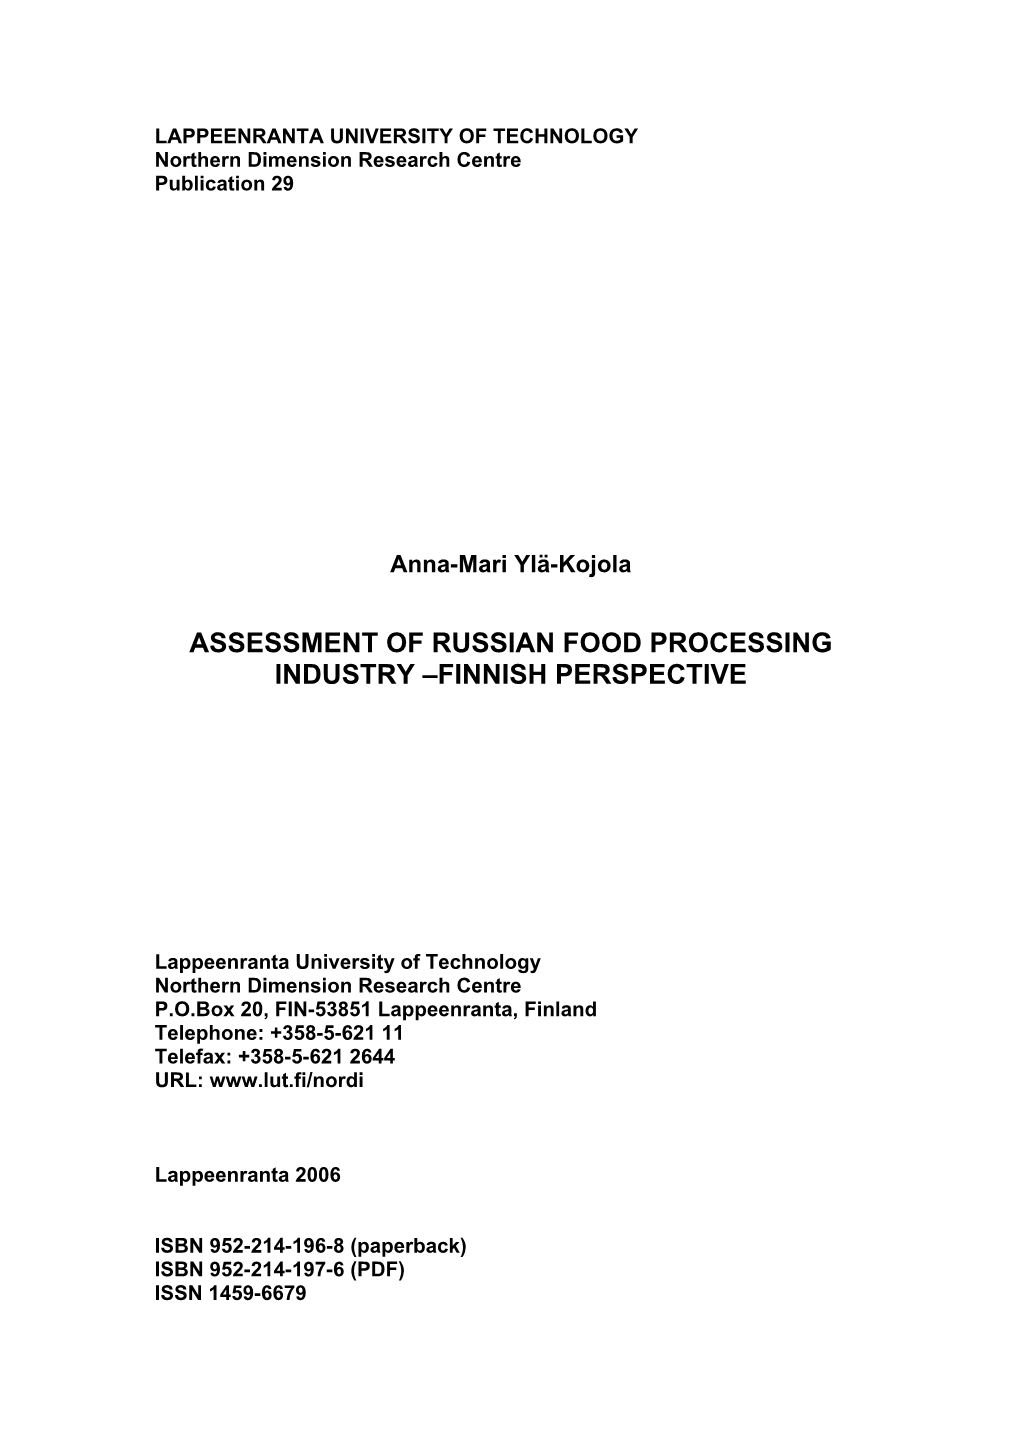 Assessment of Russian Food Processing Industry –Finnish Perspective